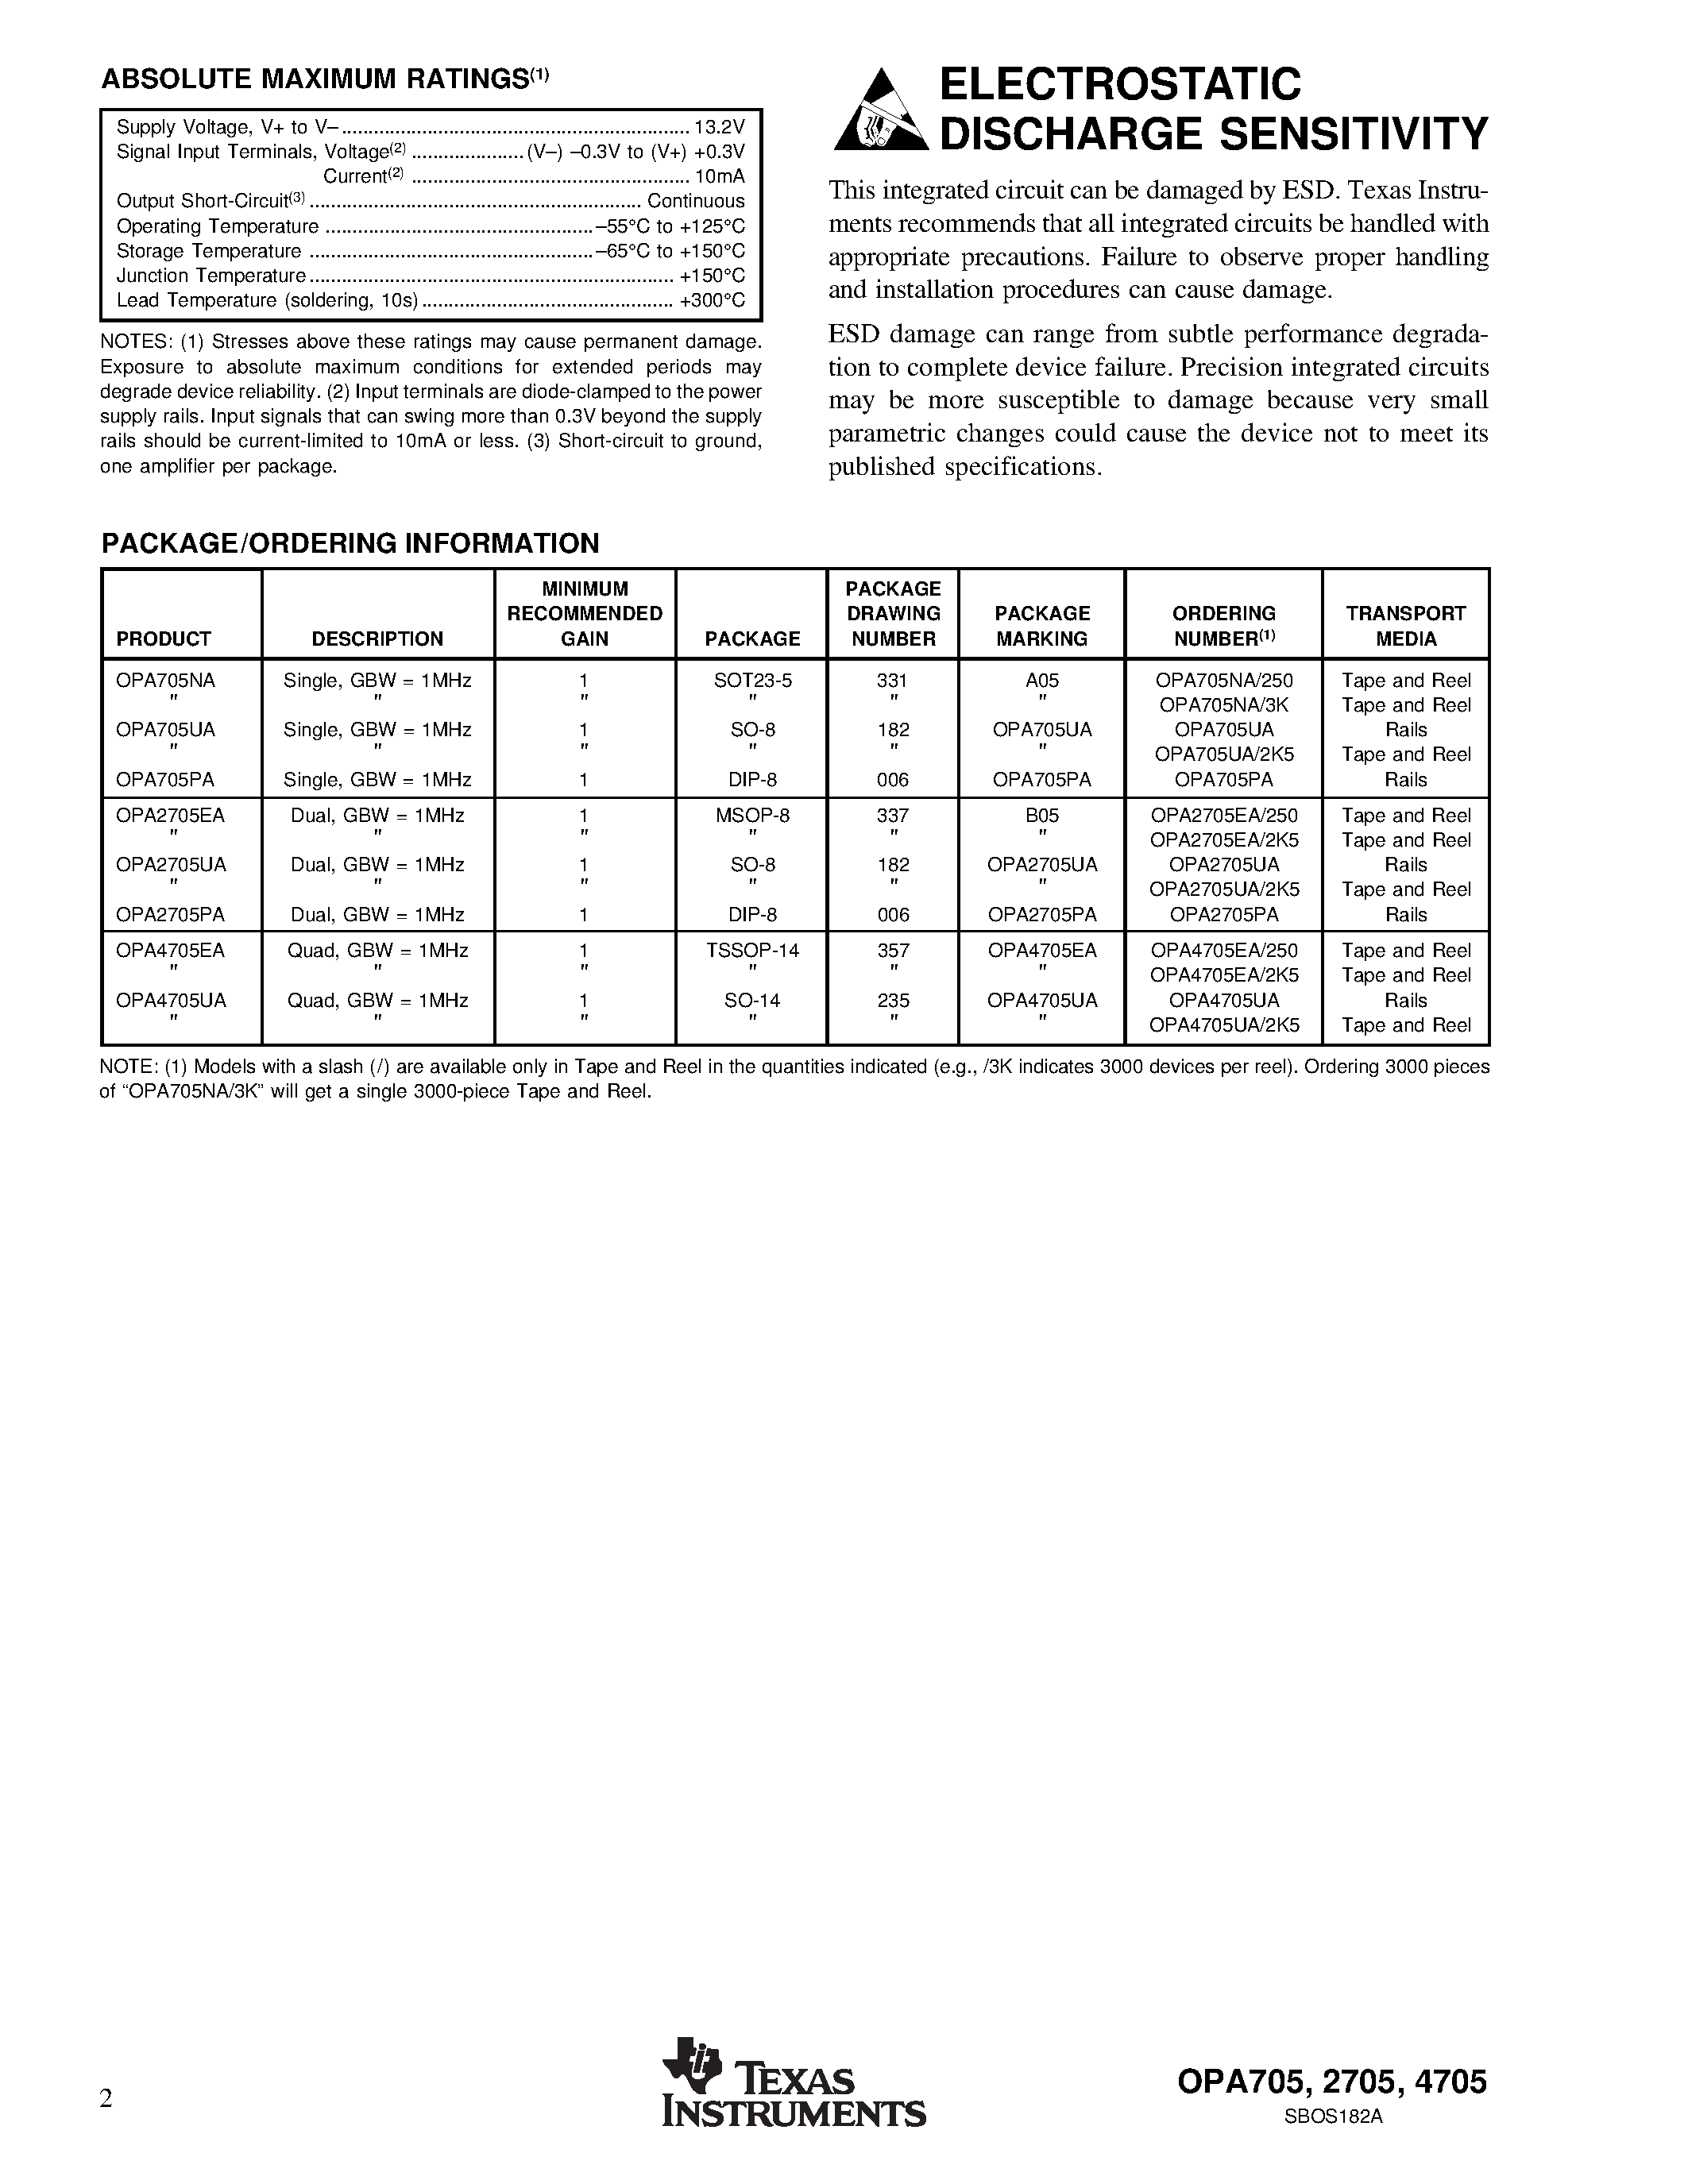 Datasheet OPA705 - Low-Cost / CMOS / Rail-to-Rail / I/O OPERATIONAL AMPLIFIERS page 2